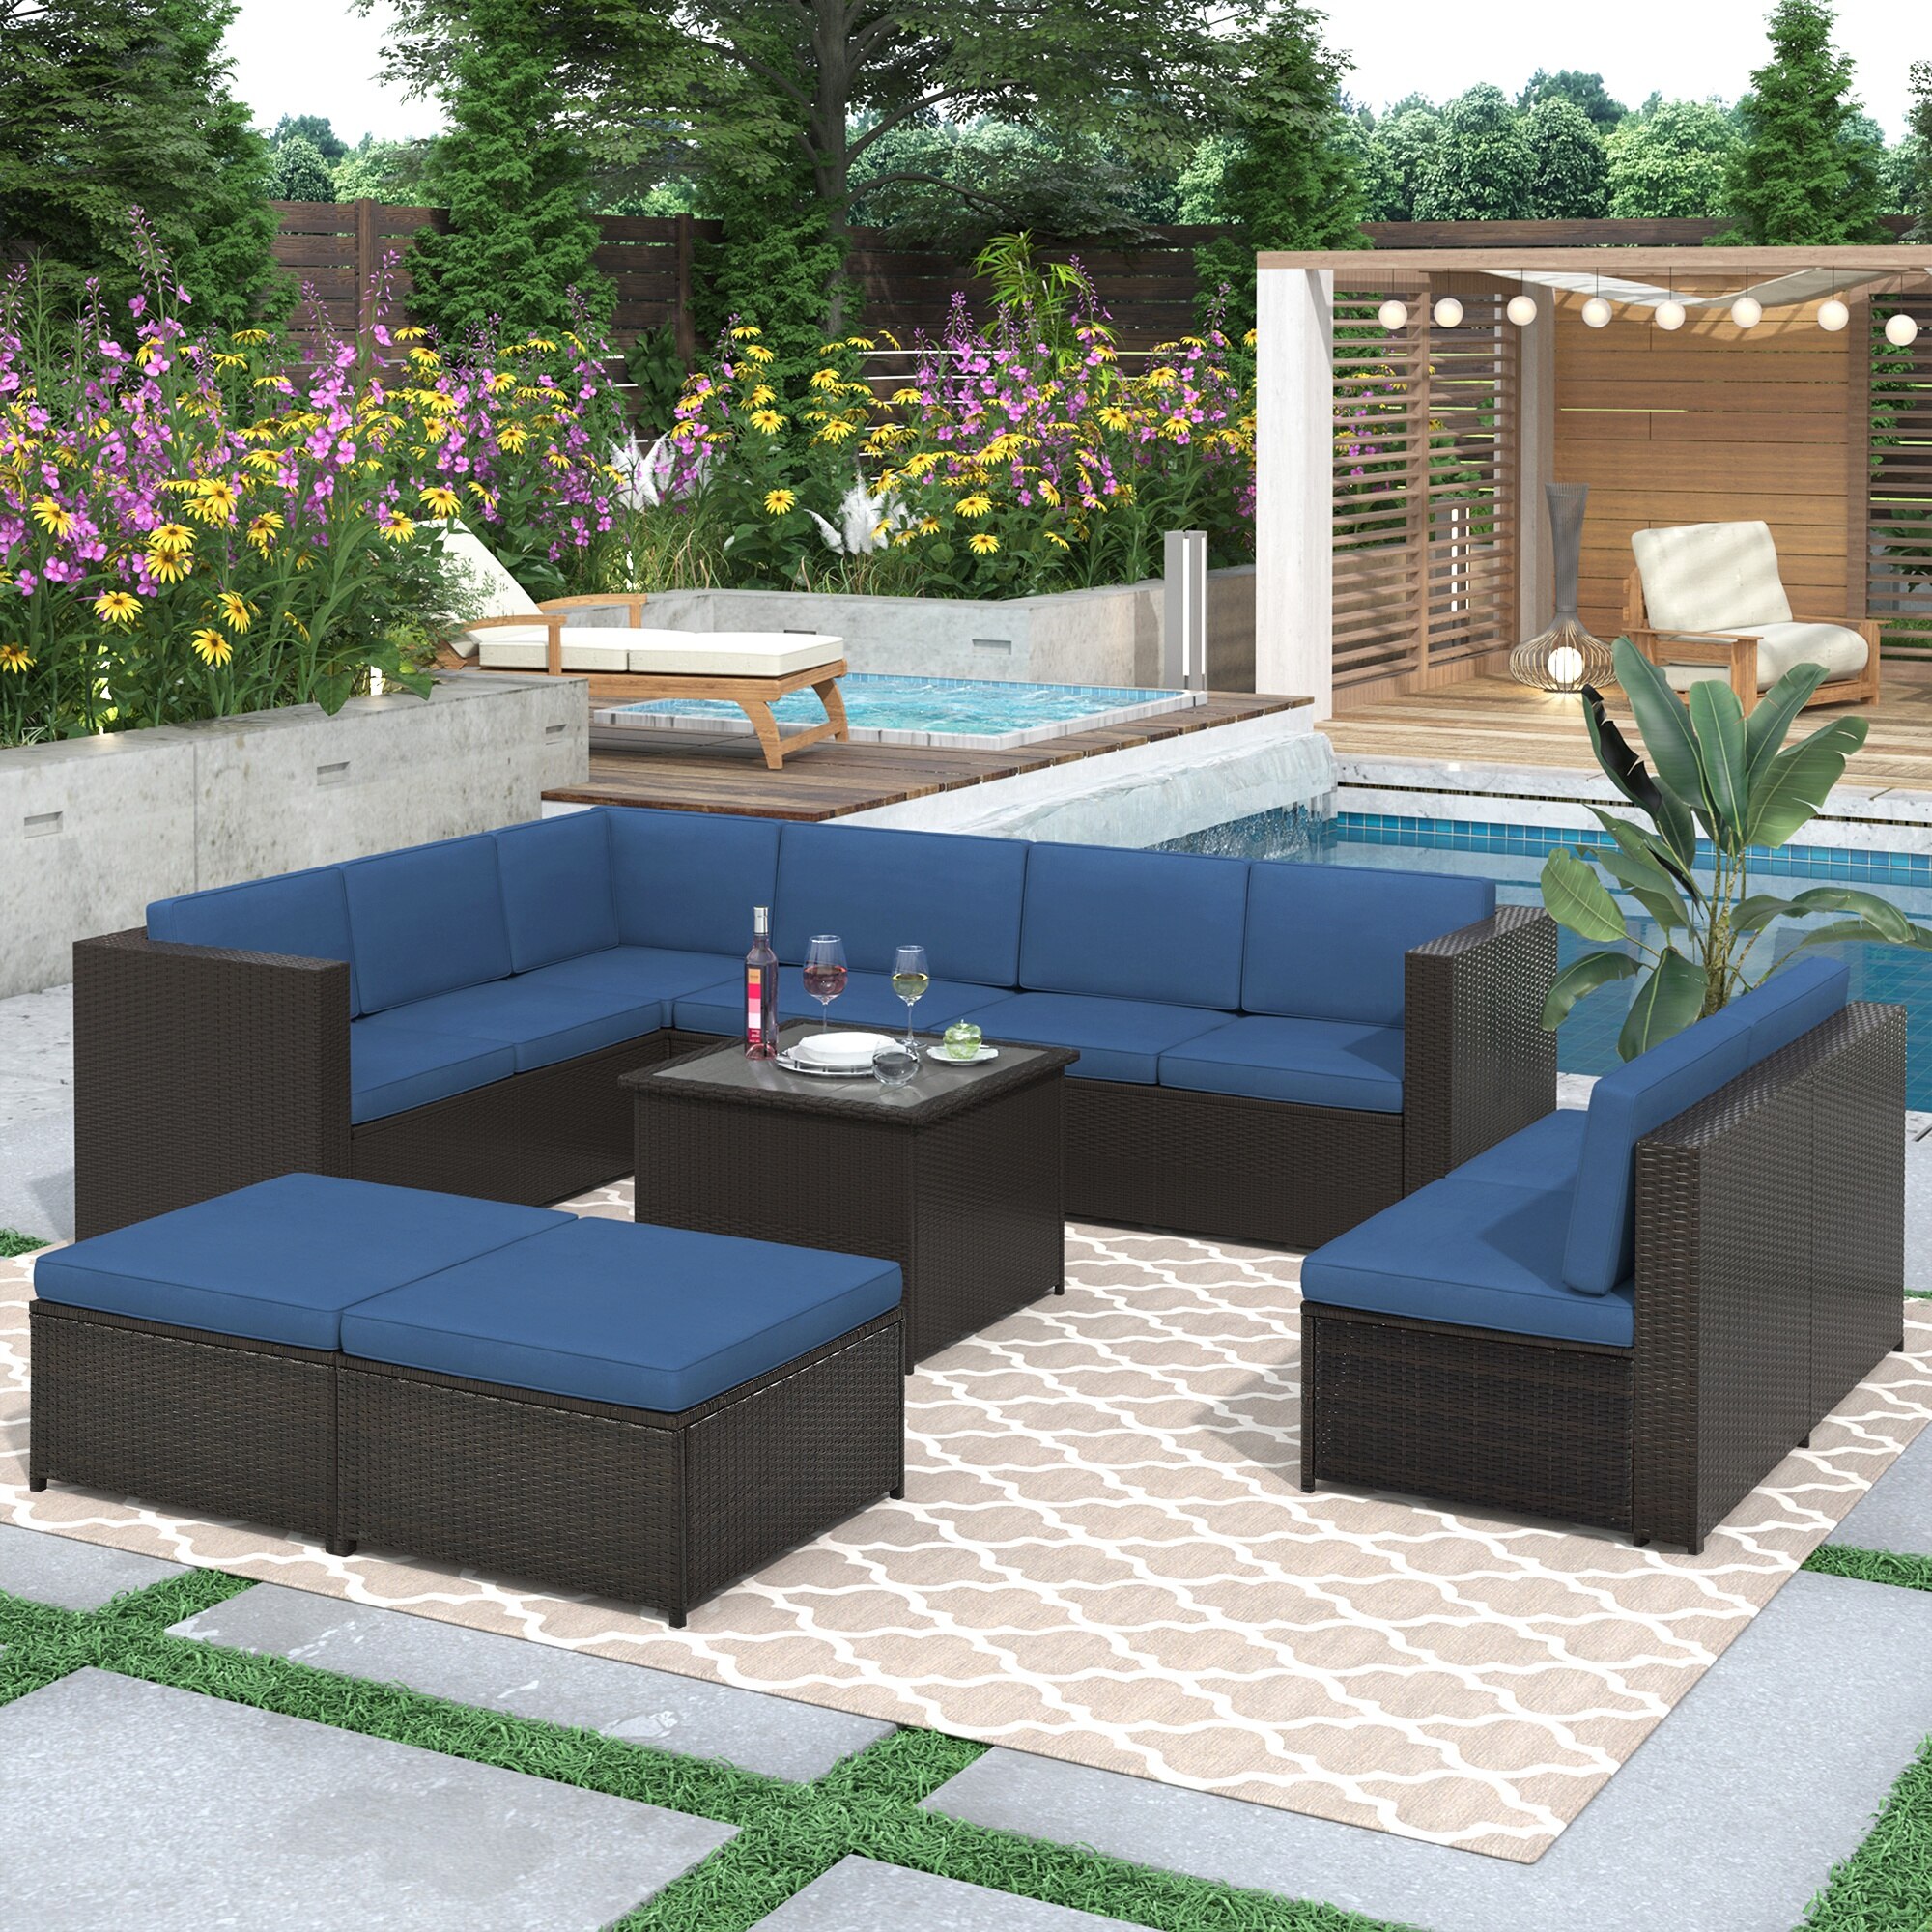 9 Piece Rattan Sectional Seating Group With Cushions And Ottoman Patio Furniture Sets Outdoor Wicker Sectional Garden Sofas